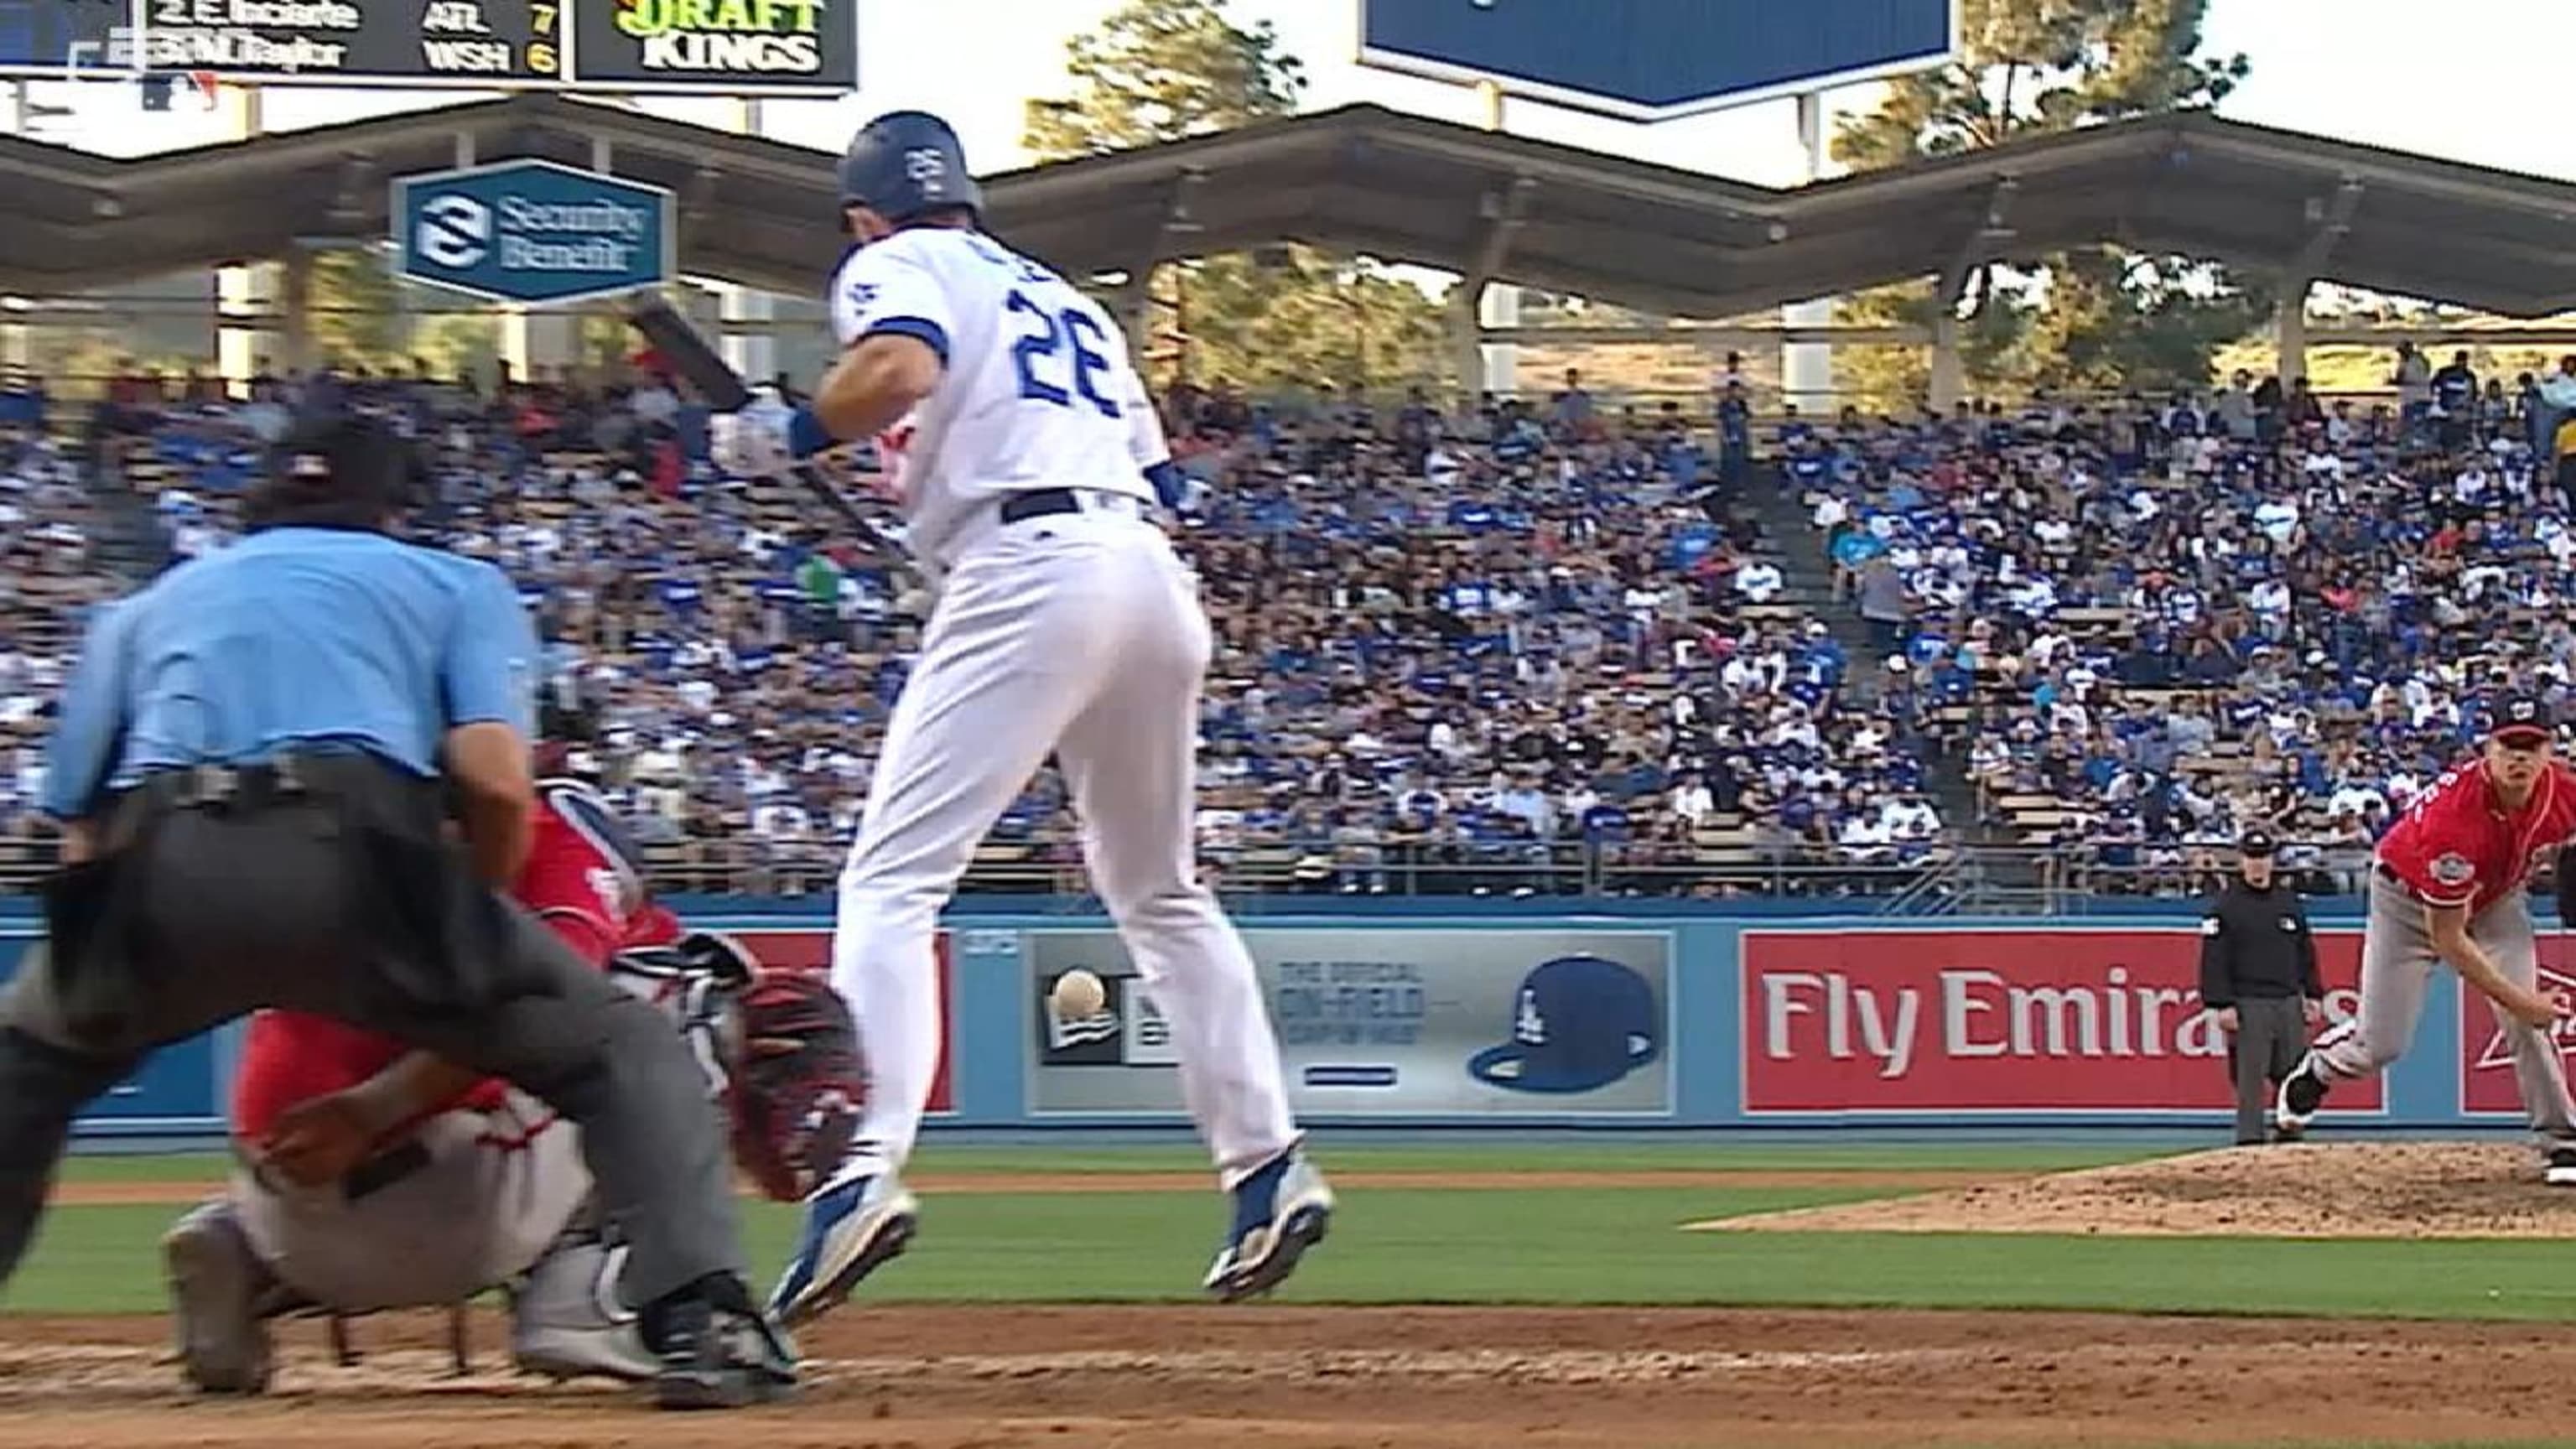 Chase Utley is back with the Dodgers and could join the unusual 2,000 H/200  HBP Club